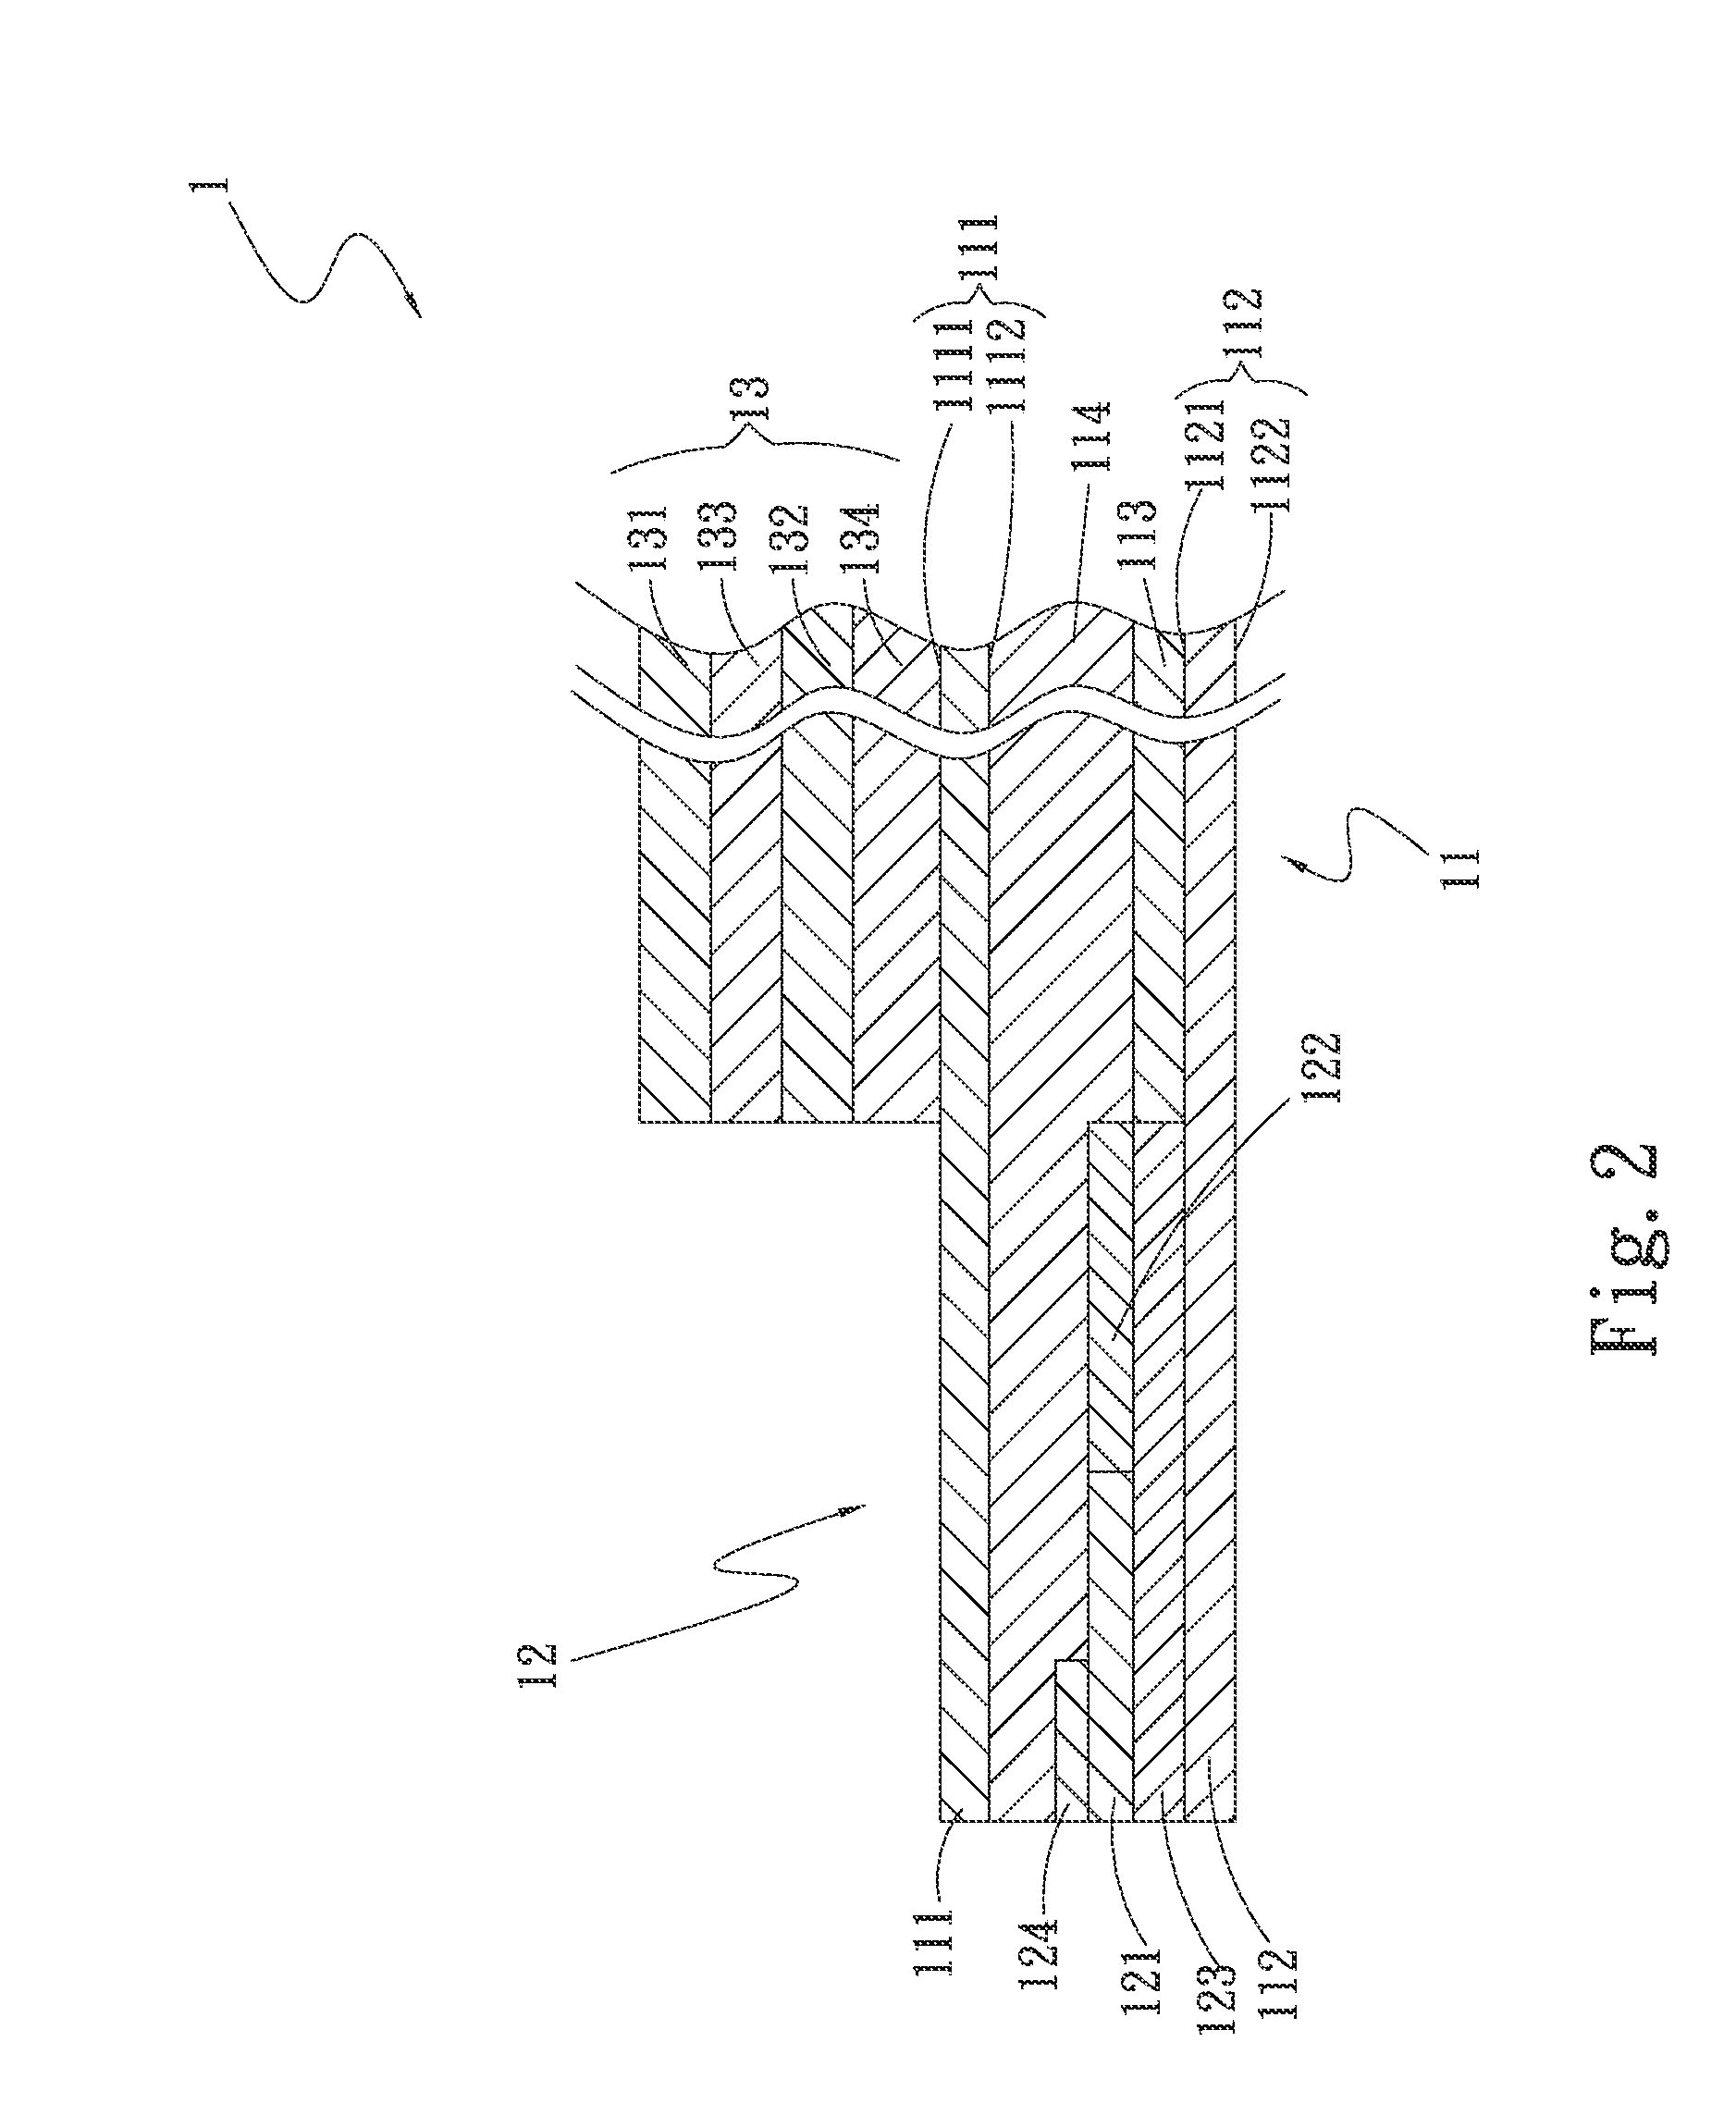 Touch device with photovolatic conversion function